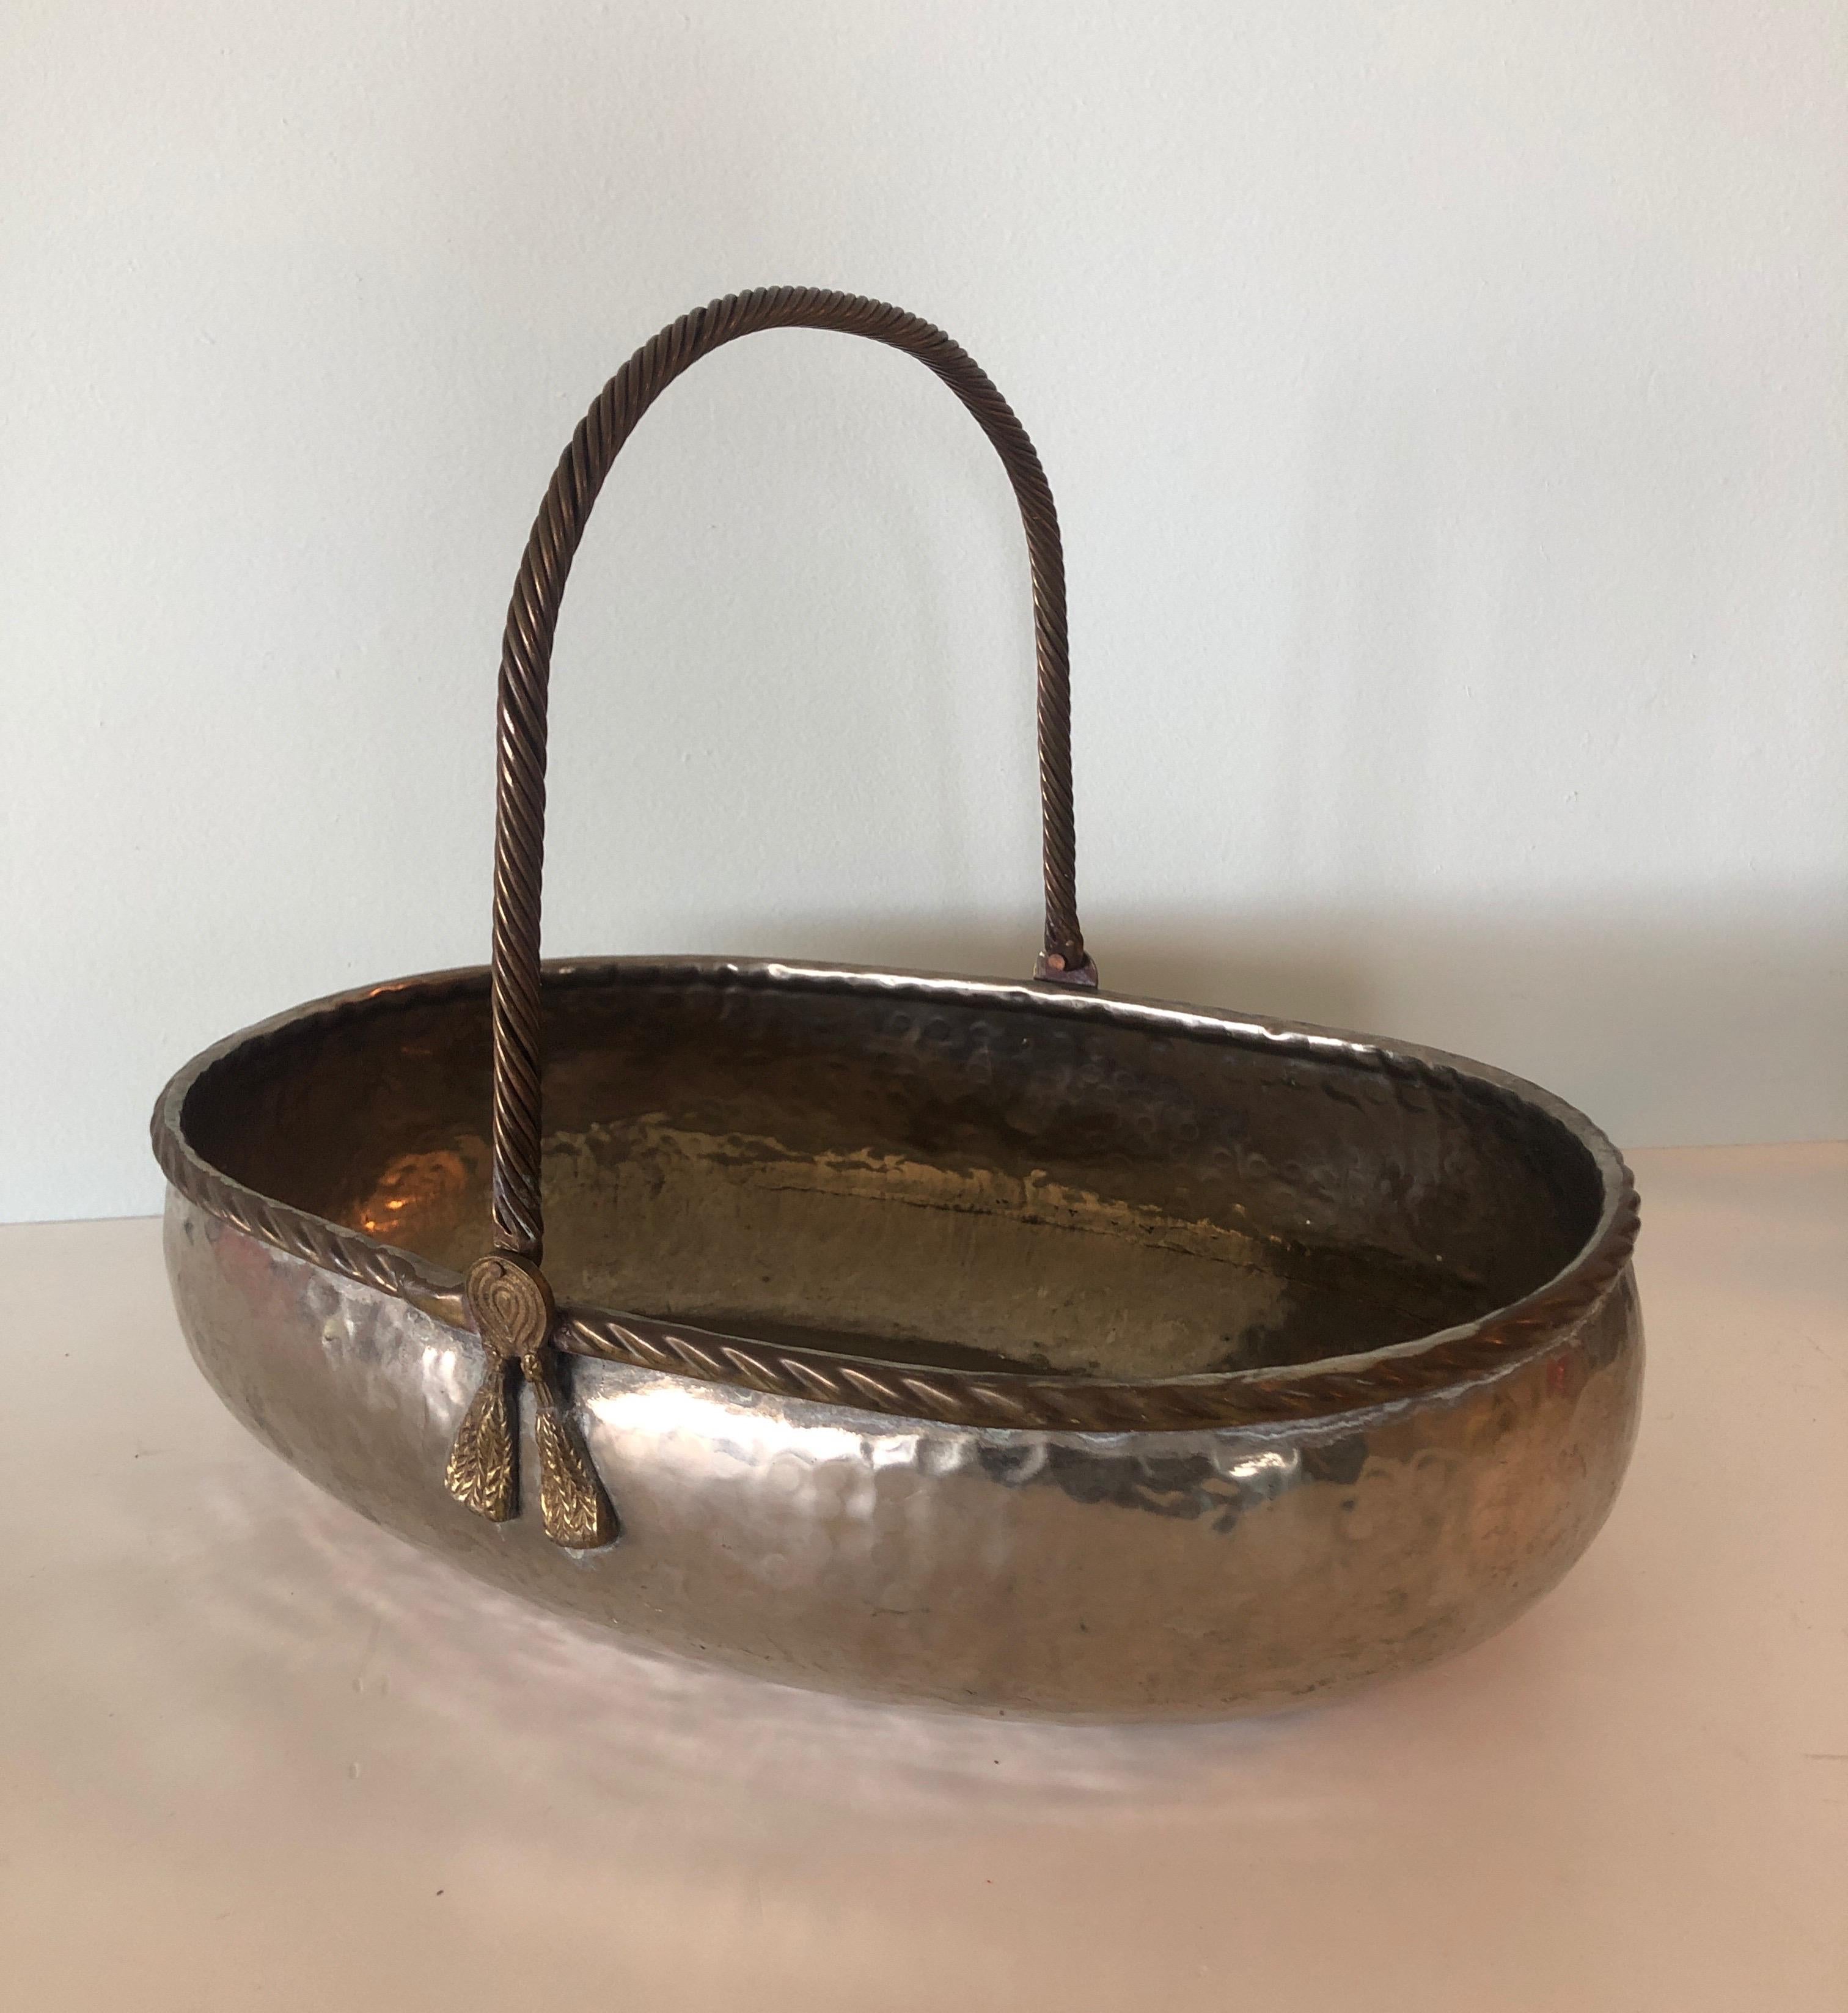 Large hand-hammered silver and brass Indian metal decorative basket
Some discoloration in the inside of the basket.
Size: 16 x 10 x 4.75 